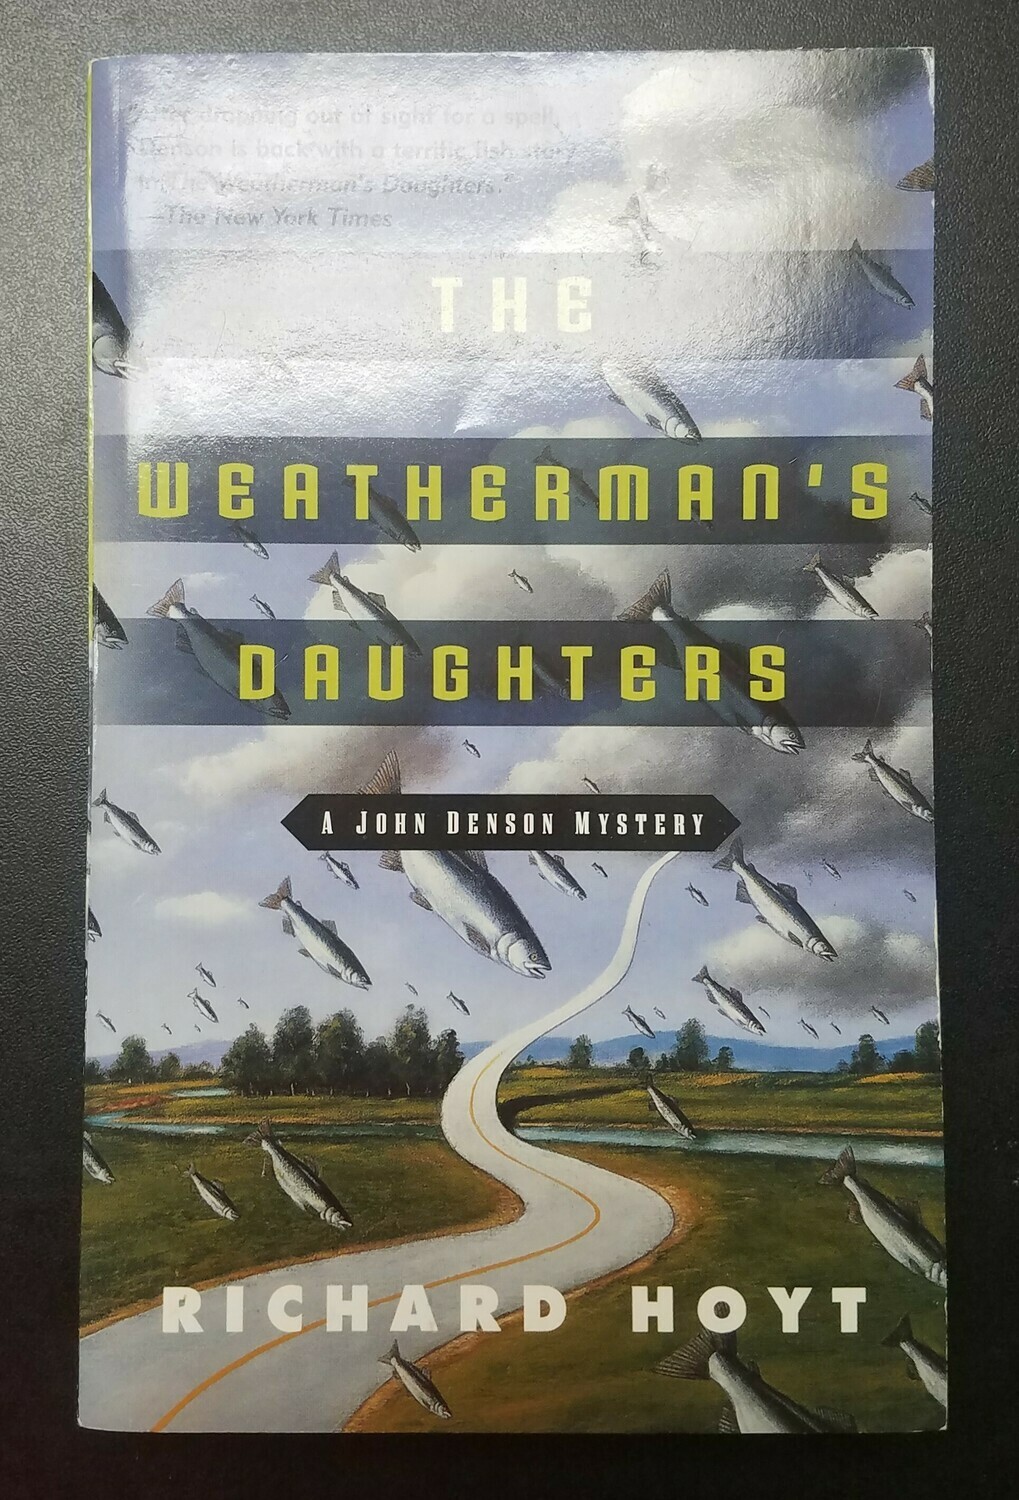 The Weatherman's Daughters by Richard Hoyt